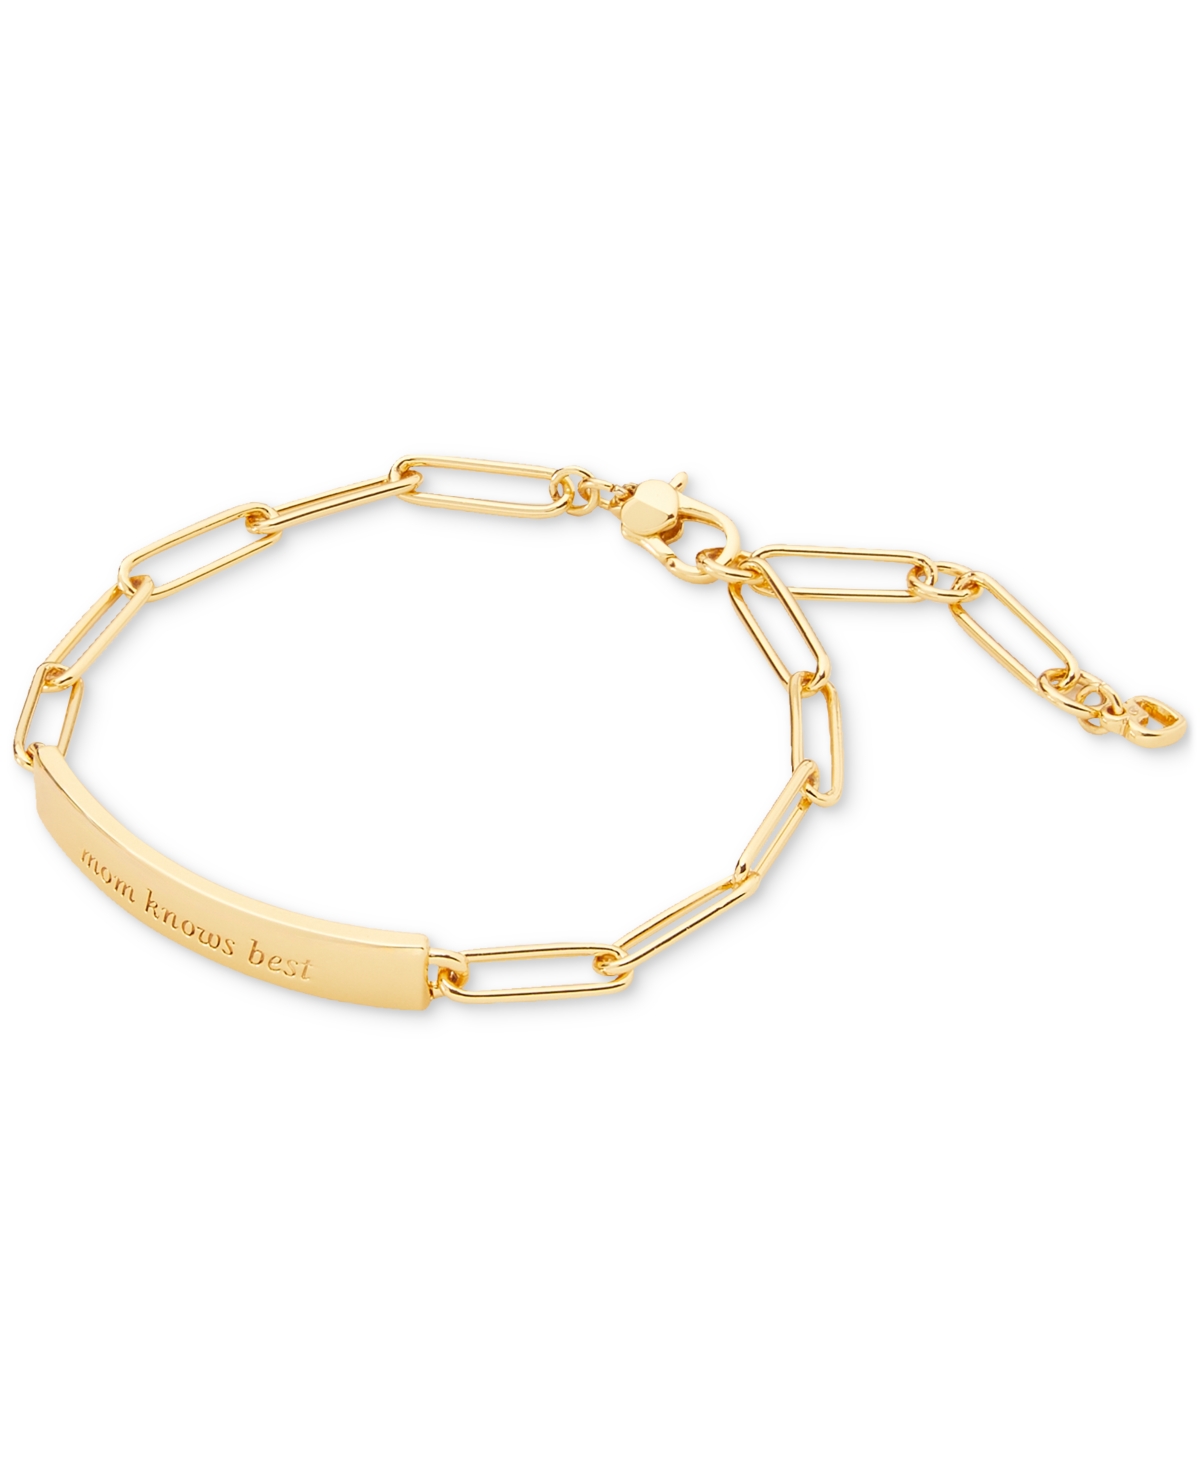 Shop Kate Spade Gold-tone Mom Knows Best Id Bracelet In Gold.